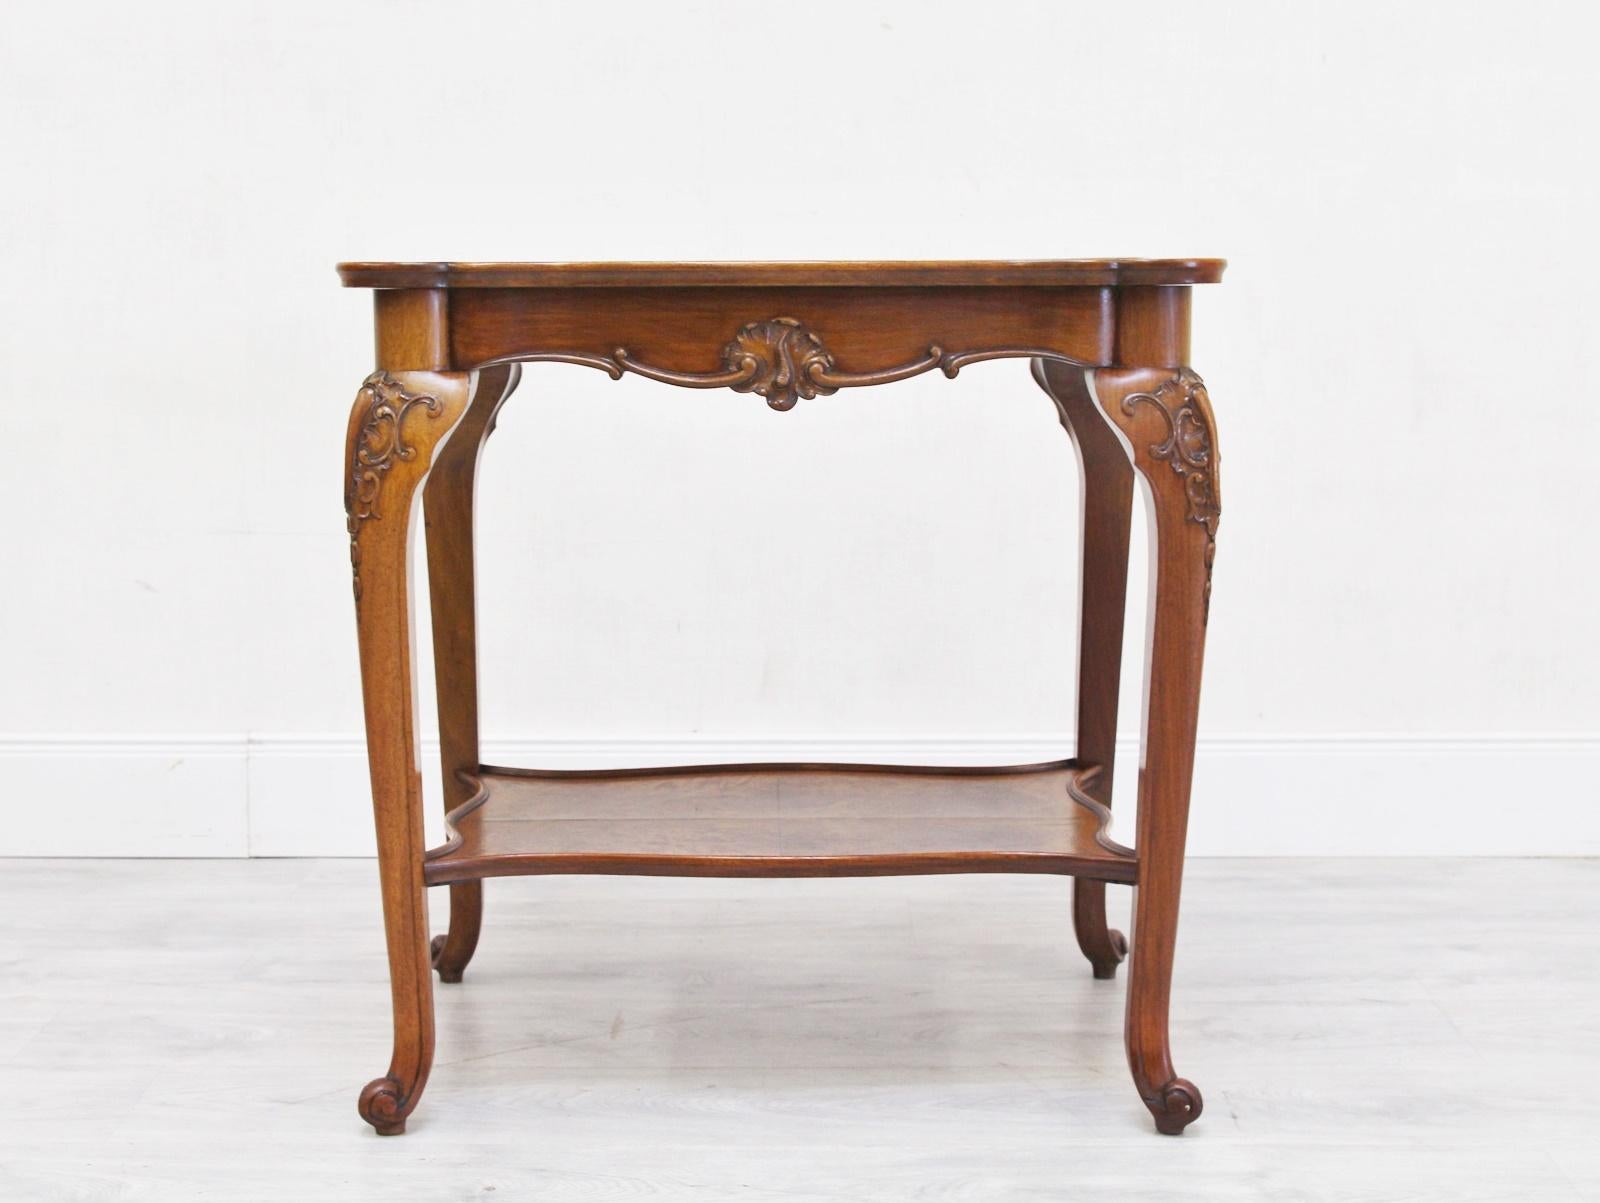 Tea table or minibar
Tea table made of walnut wood

This is an exclusive tea table made of solid walnut wood
The product is kept in a natural color and fits perfectly with the colonial style.
The lovingly embellished ornaments and the elegantly